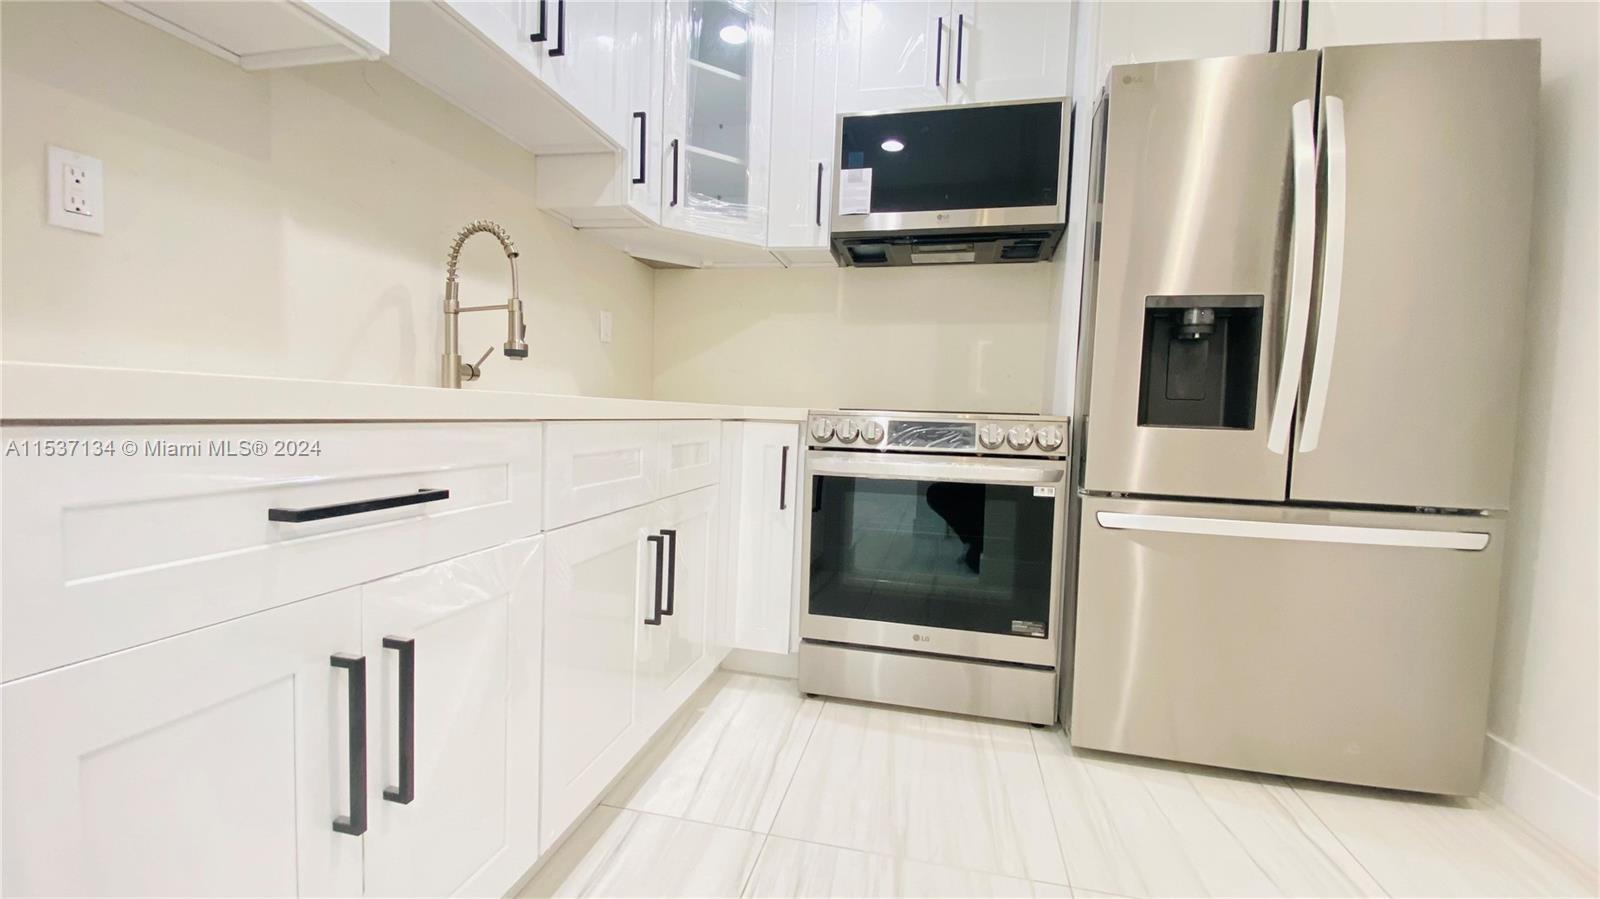 a kitchen with stainless steel appliances a refrigerator stove and white cabinets